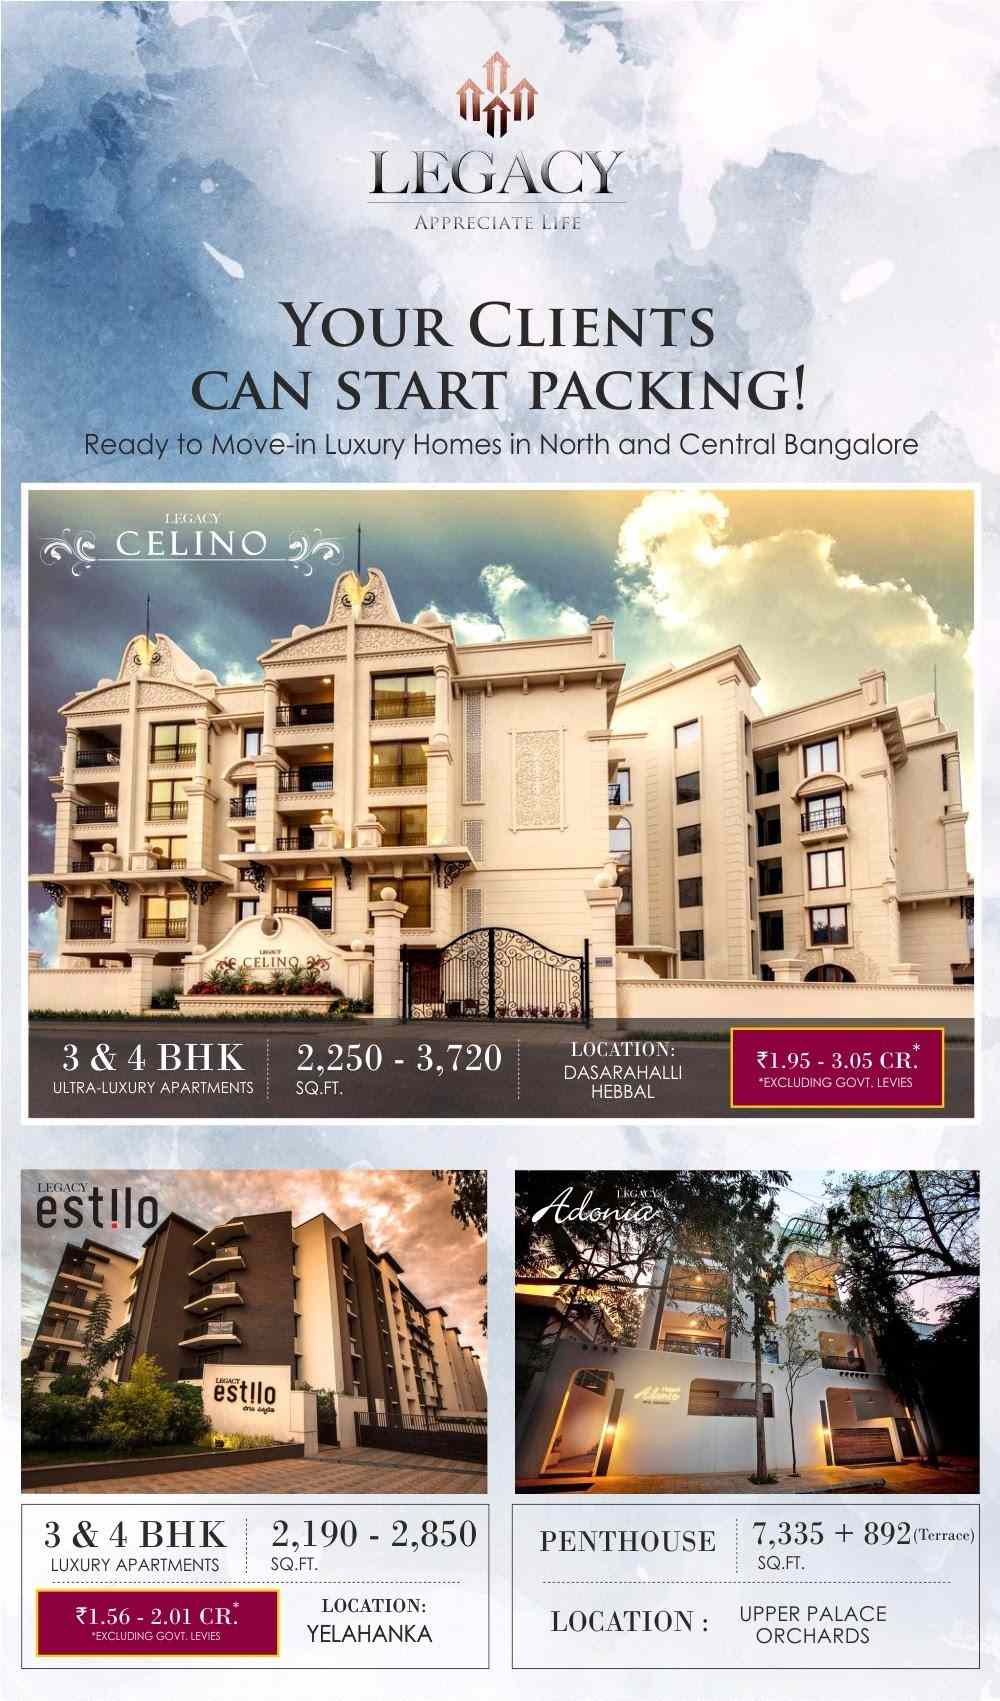 Invest in ready to move in luxury Legacy homes in North and Central Bangalore